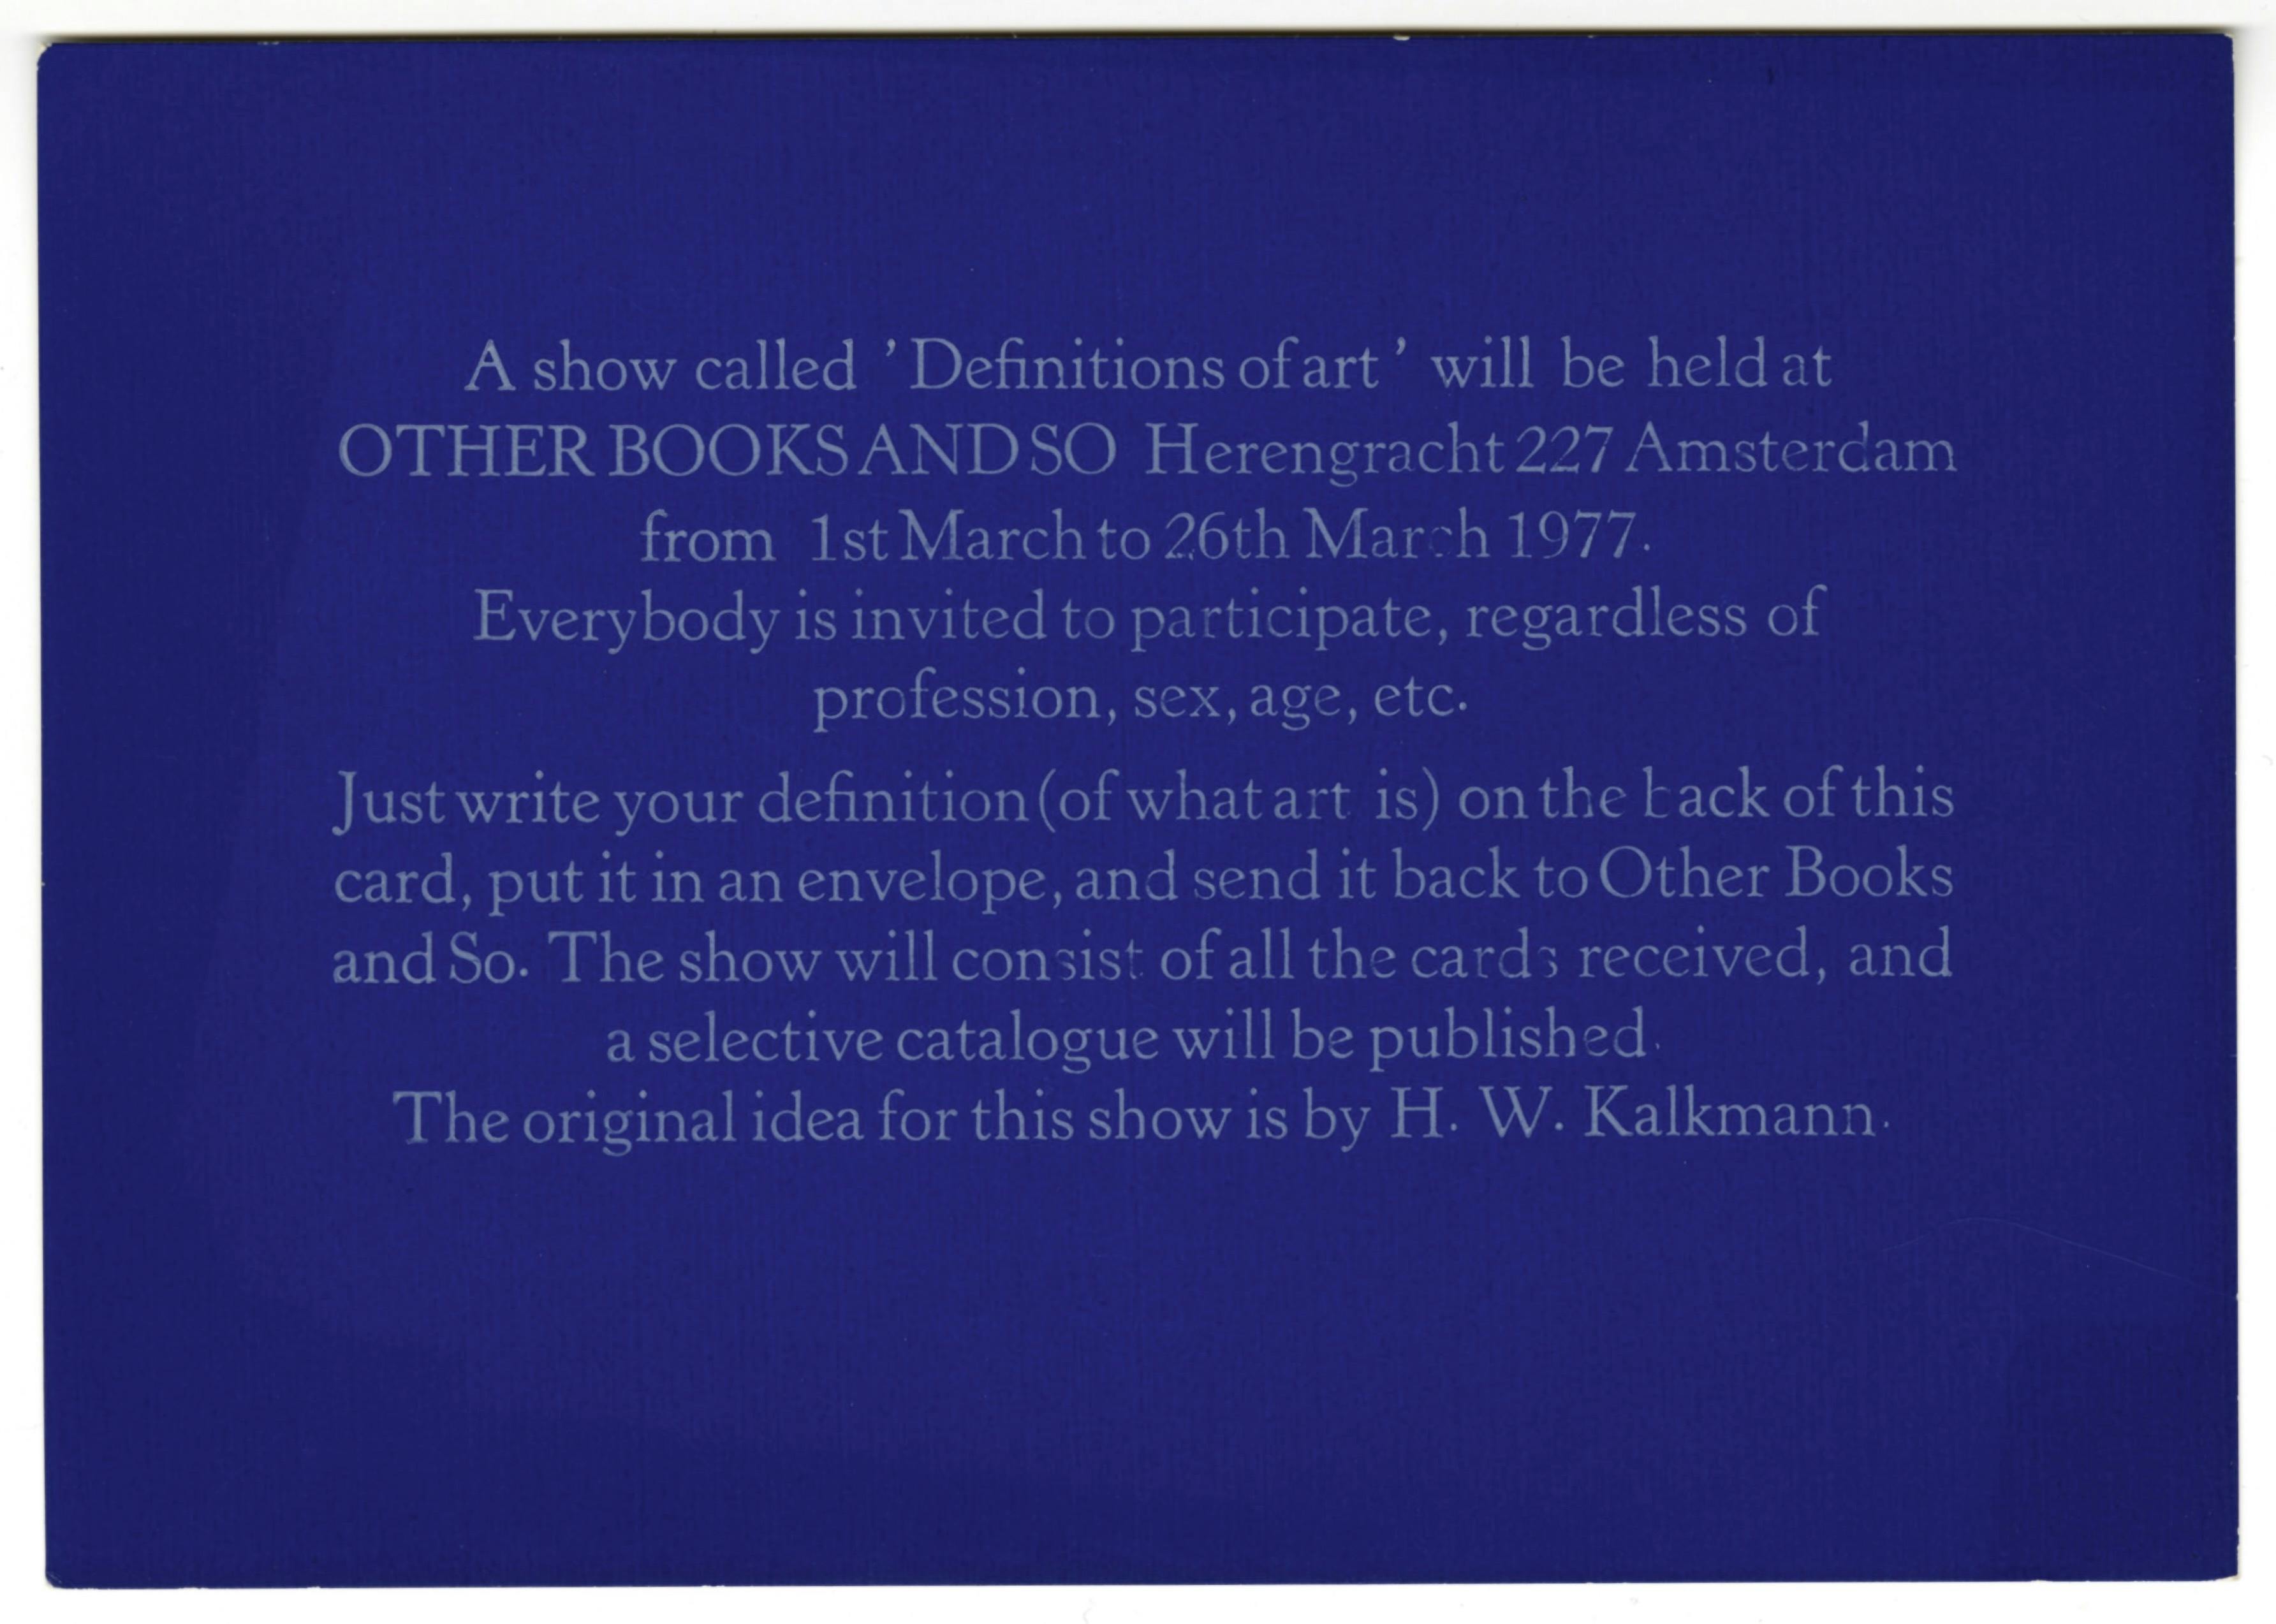 A horizontal blue postcard printed with white text, which reads, “A show called ‘Definitions of art’ will be held at OTHER BOOKS AND SO Herengracht 227 Amsterdam from 1st March to 26th March 1977. Everybody is invited to participate, regardless of profession, sex, age, etc. Just write your definition (of what art is) on the back of this card, put it in an envelope, and send it back to Other Books and So. The show will consist of all the cards received, and a selective catalogue will be published. The original idea for this show is by H. W. Kalkmann.”